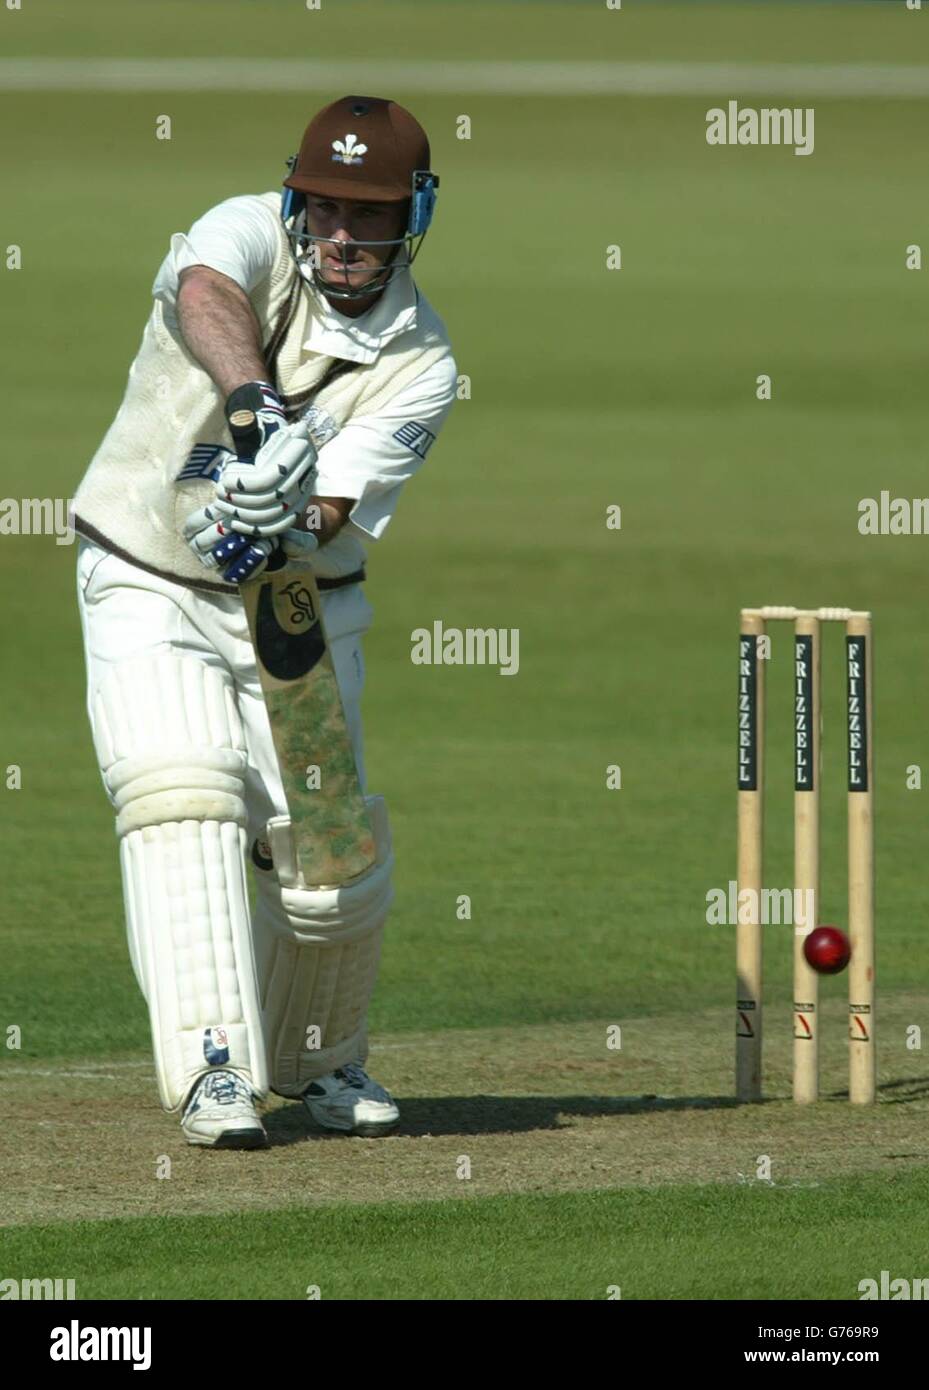 Surrey batsman Graham Thorpe in action against Hampshire in their Frizzell County Championship match at The Rose Bowl near Southampton today. Thorpe has been recalled into the England side for the up-coming Ashes Series. Today he was out for 19 runs bowled by Shaun Udal. Stock Photo